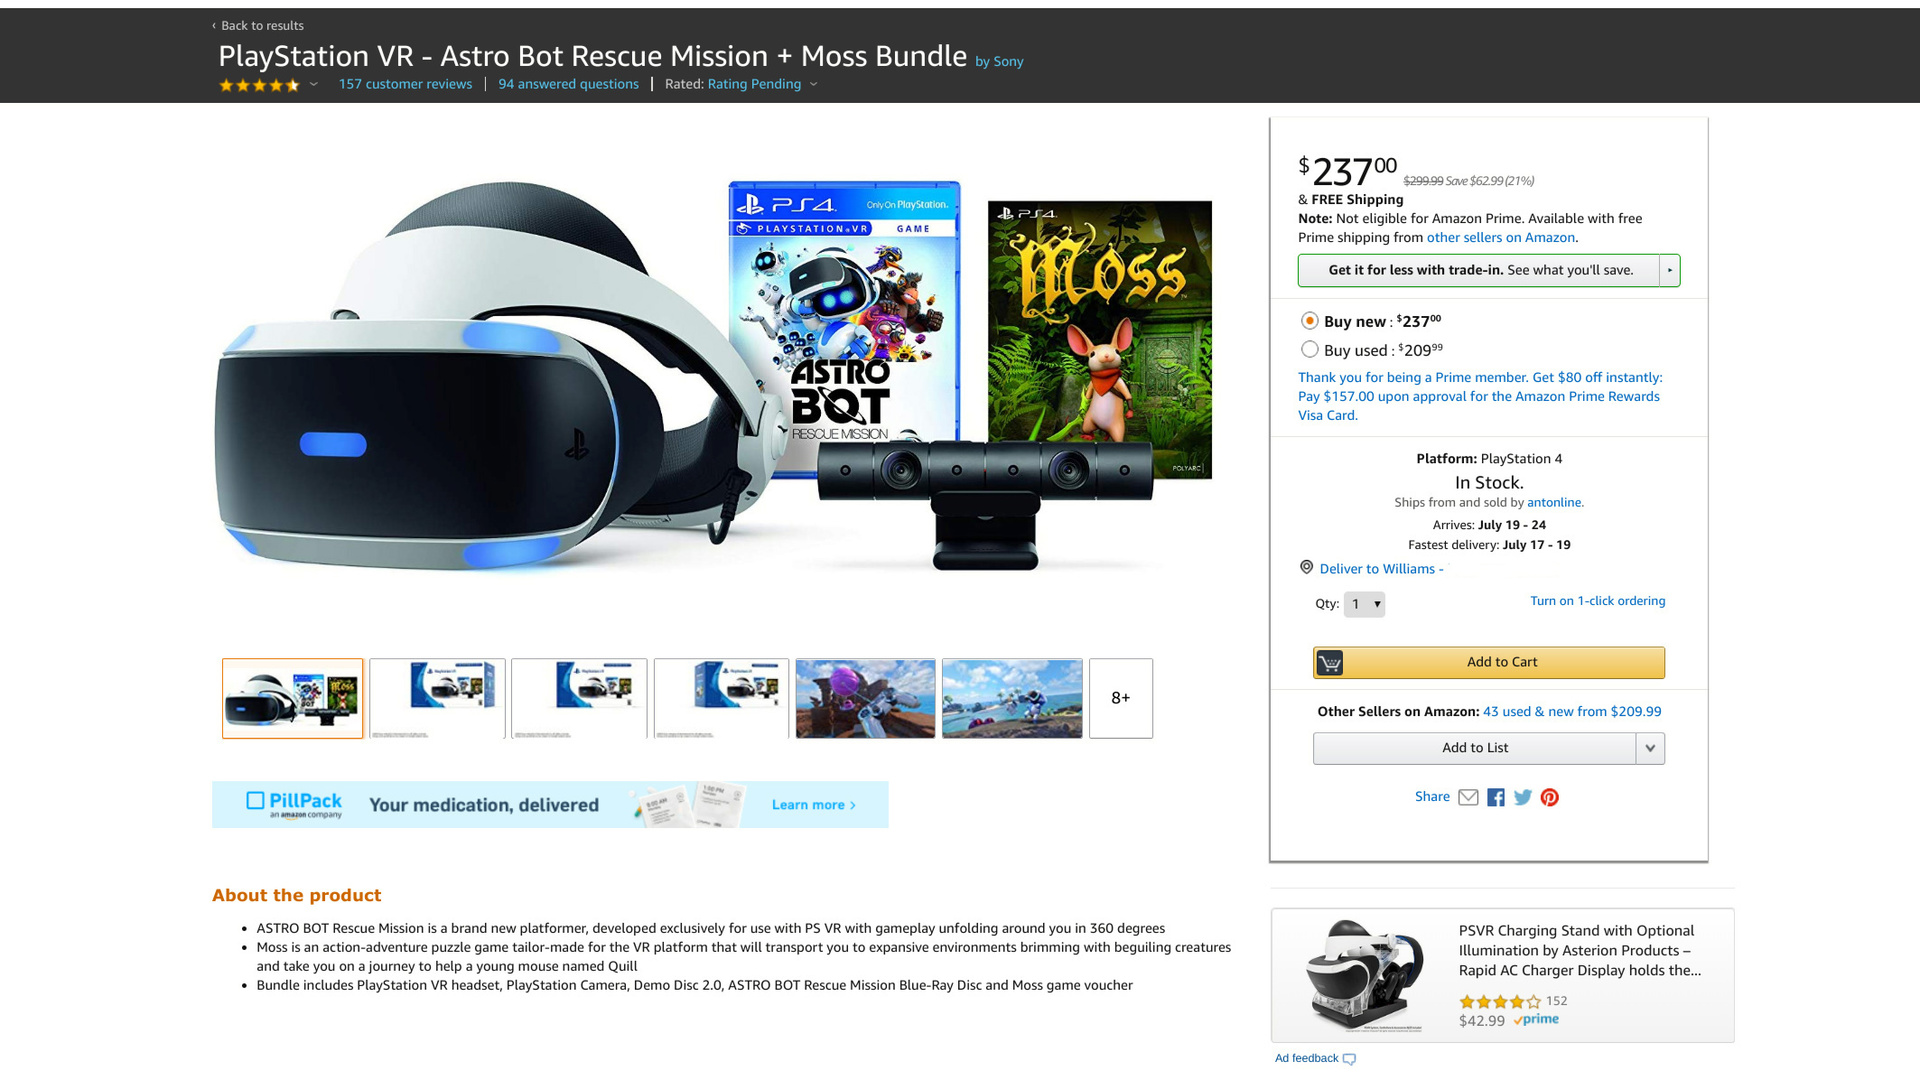 Amazon Prime Day deal on the PlayStation VR